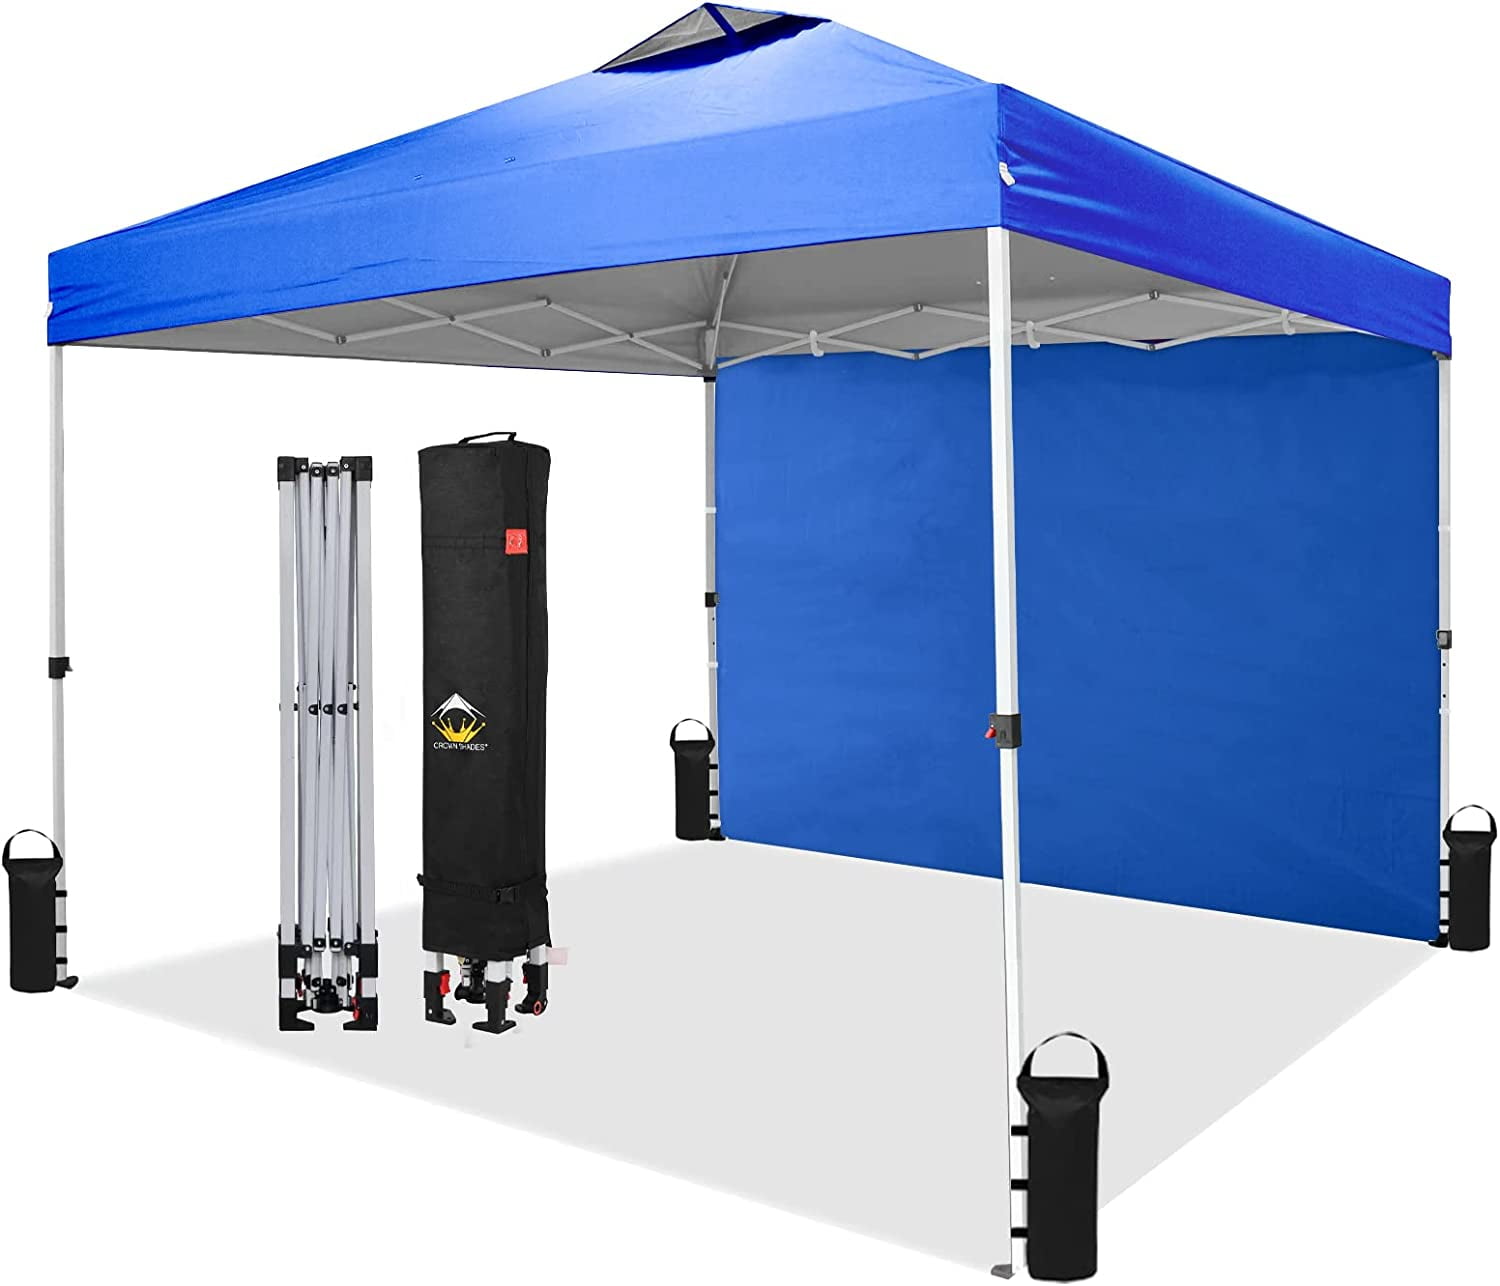  CROWN SHADES 8x8 Pop up Canopy Instant Canopy with 1 Removable  Sidewall,4 Ropes & 8 Stakes, STO'N and Go Bag, Blue : Patio, Lawn & Garden